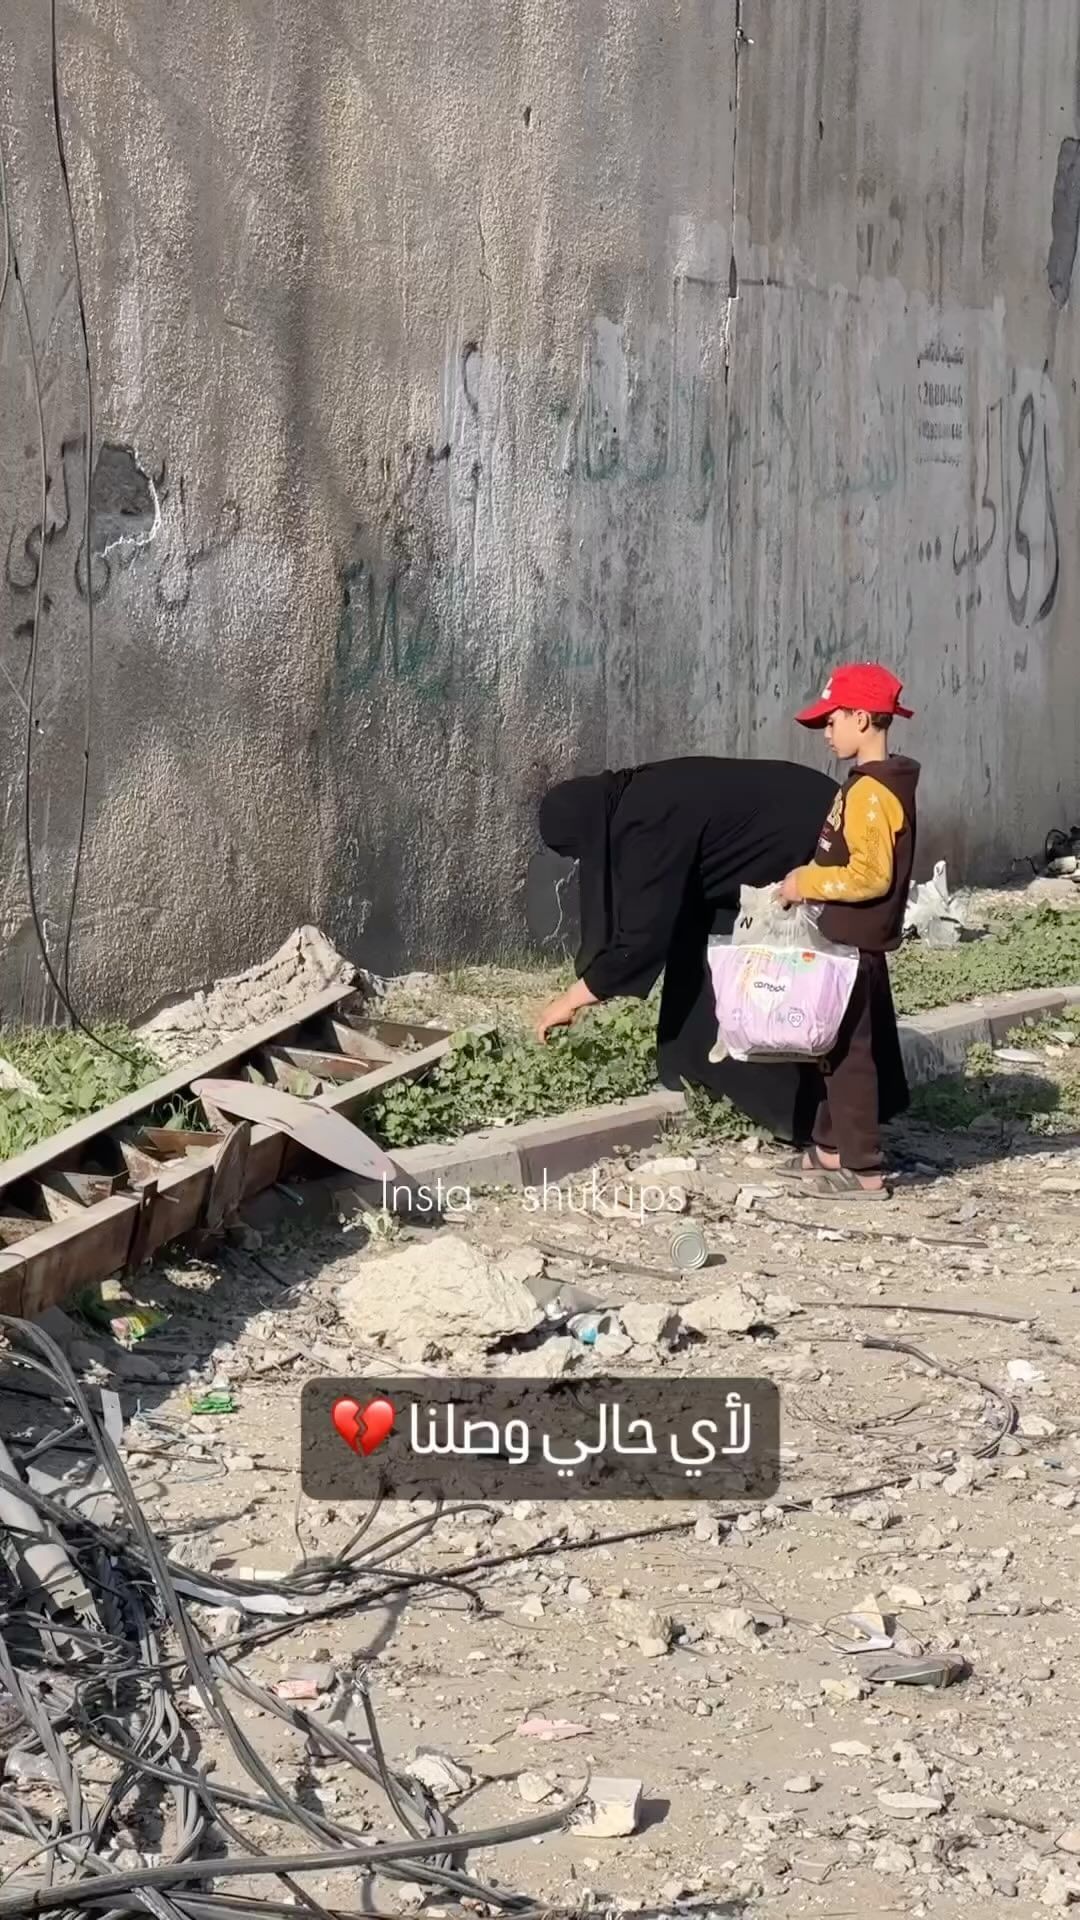 a-mother-picks-up-grass-to-feed-her-children-in-the-besieged-north-of-gaza-where-there-is-no-water,-food-or-medical-care…